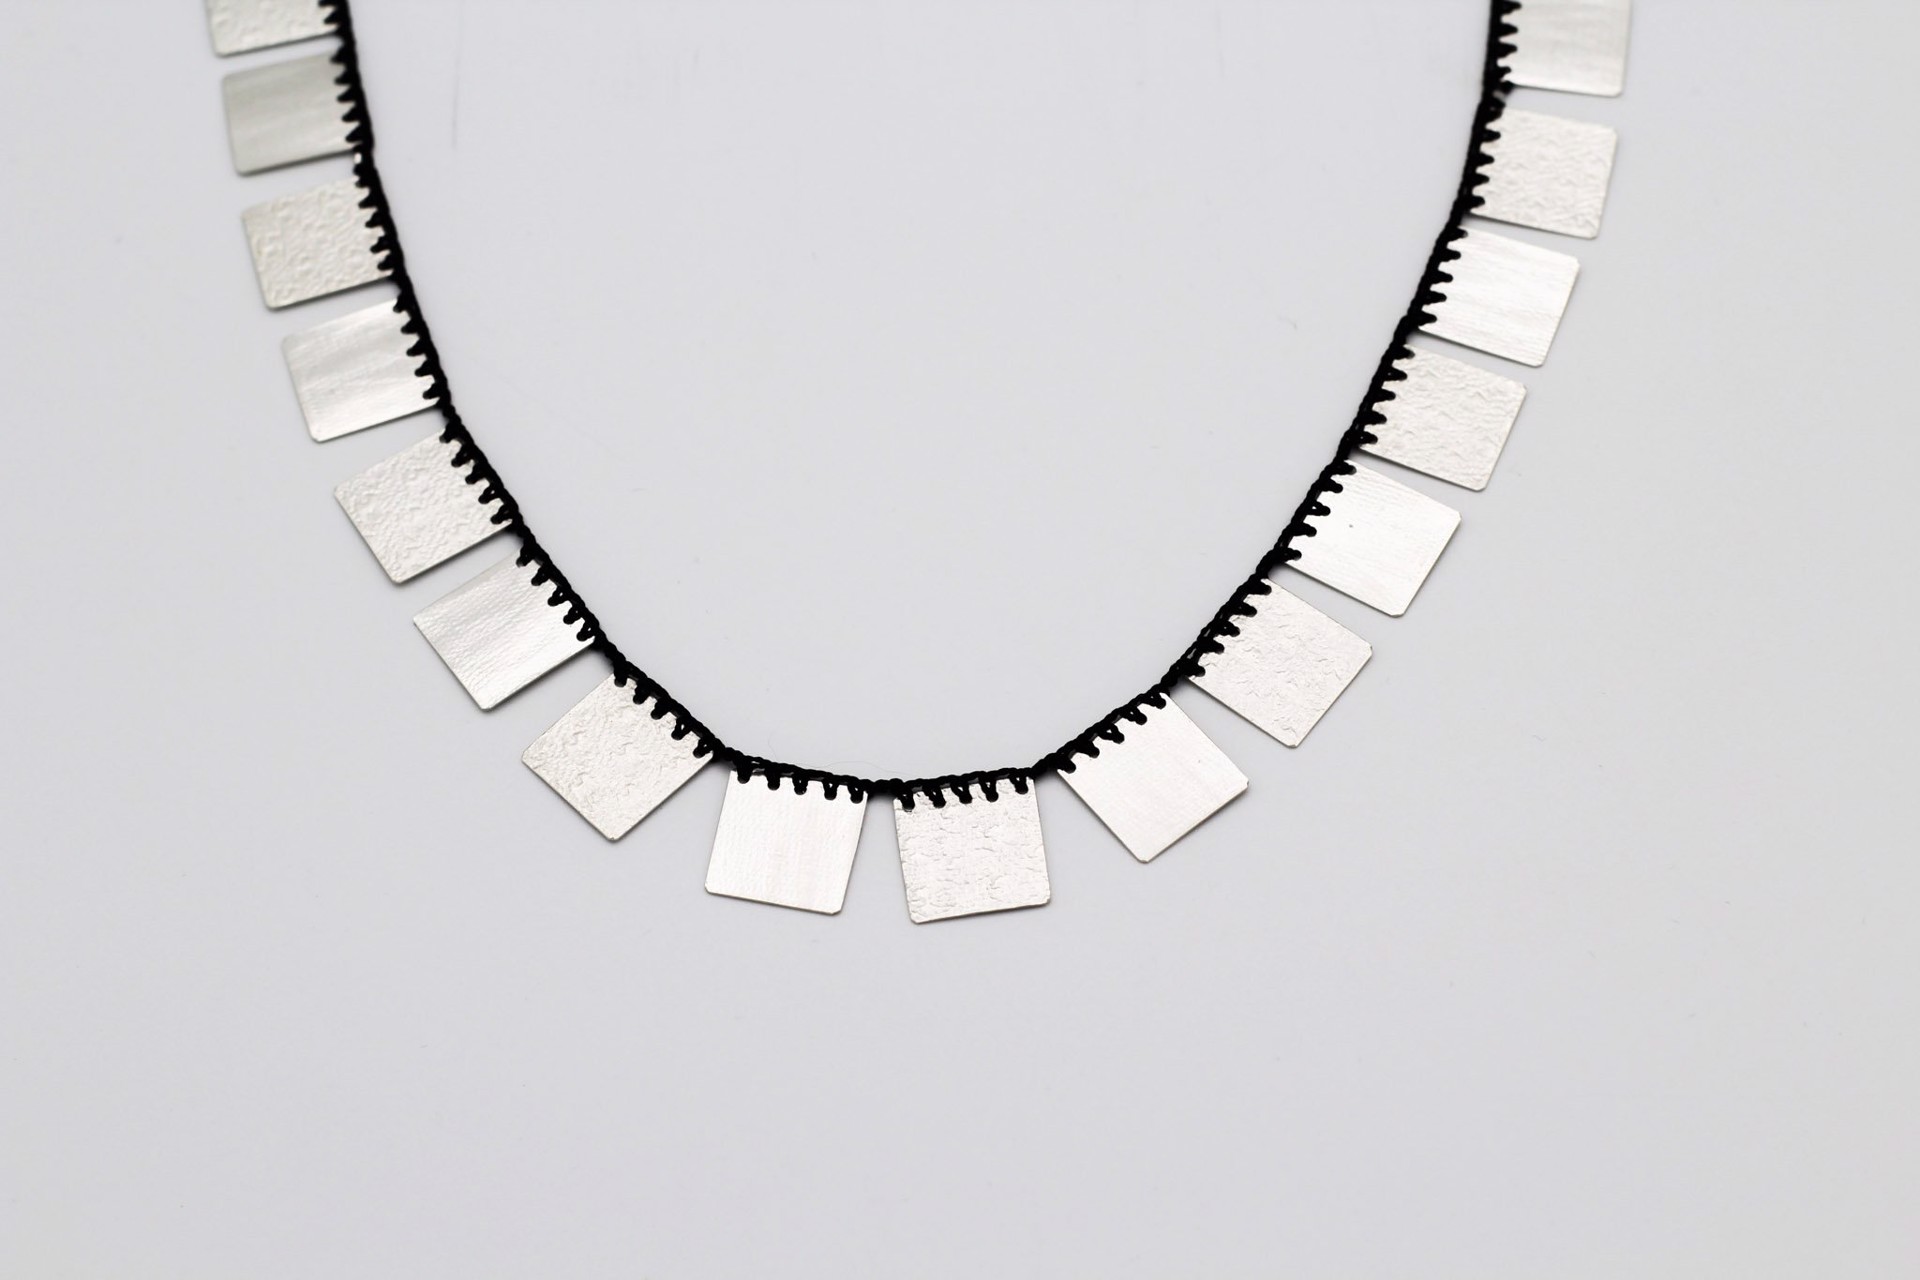 Necklace with Black Silk by Erica Schlueter